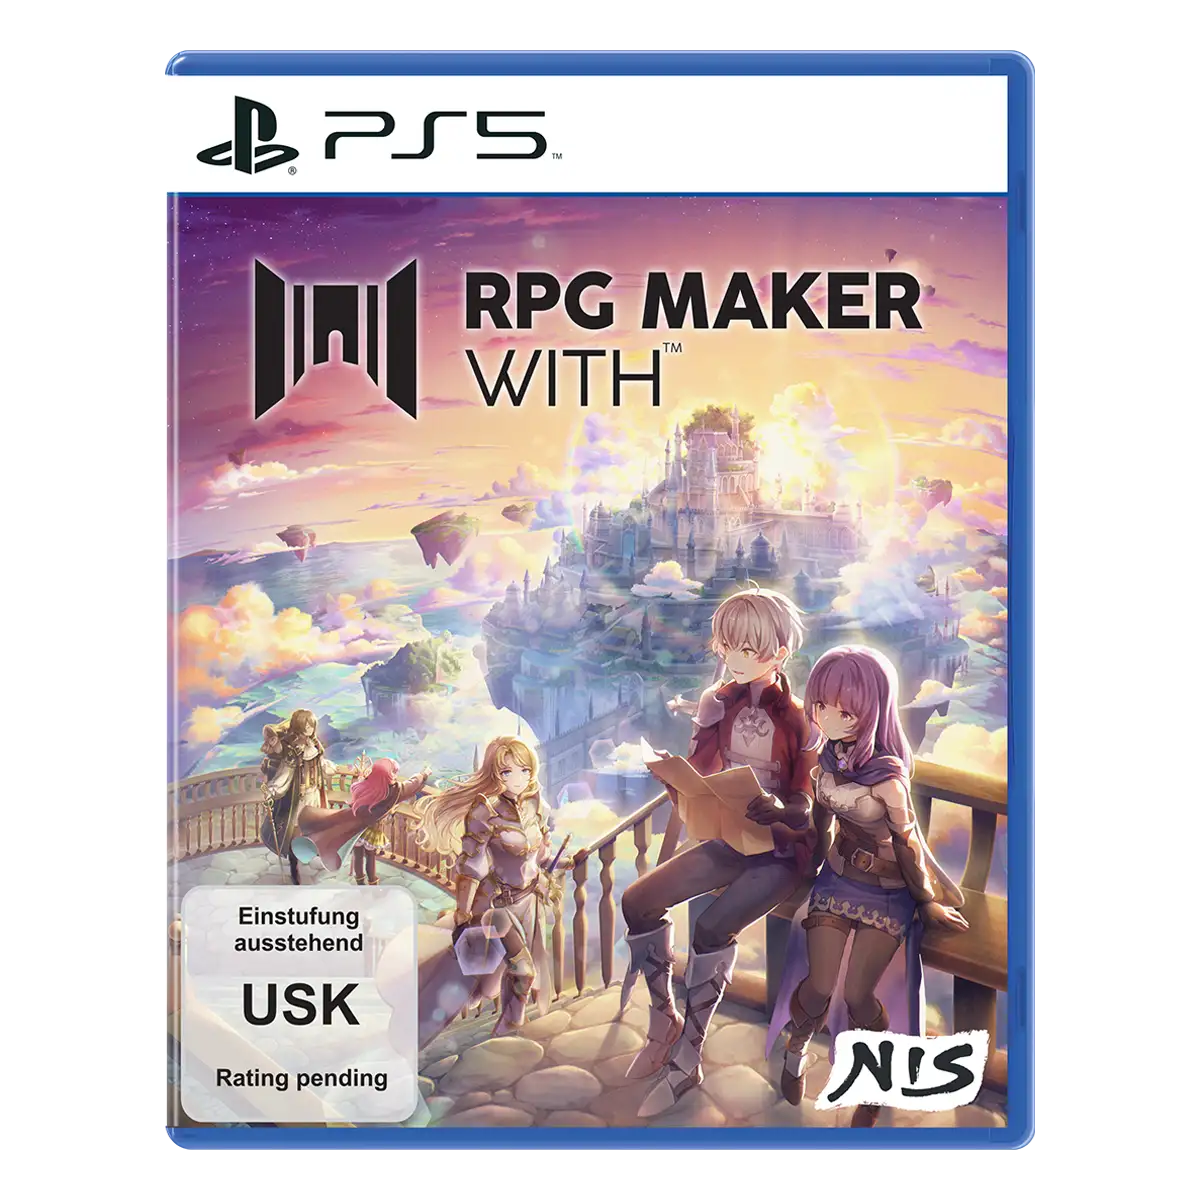 RPG MAKER WITH (PS5)